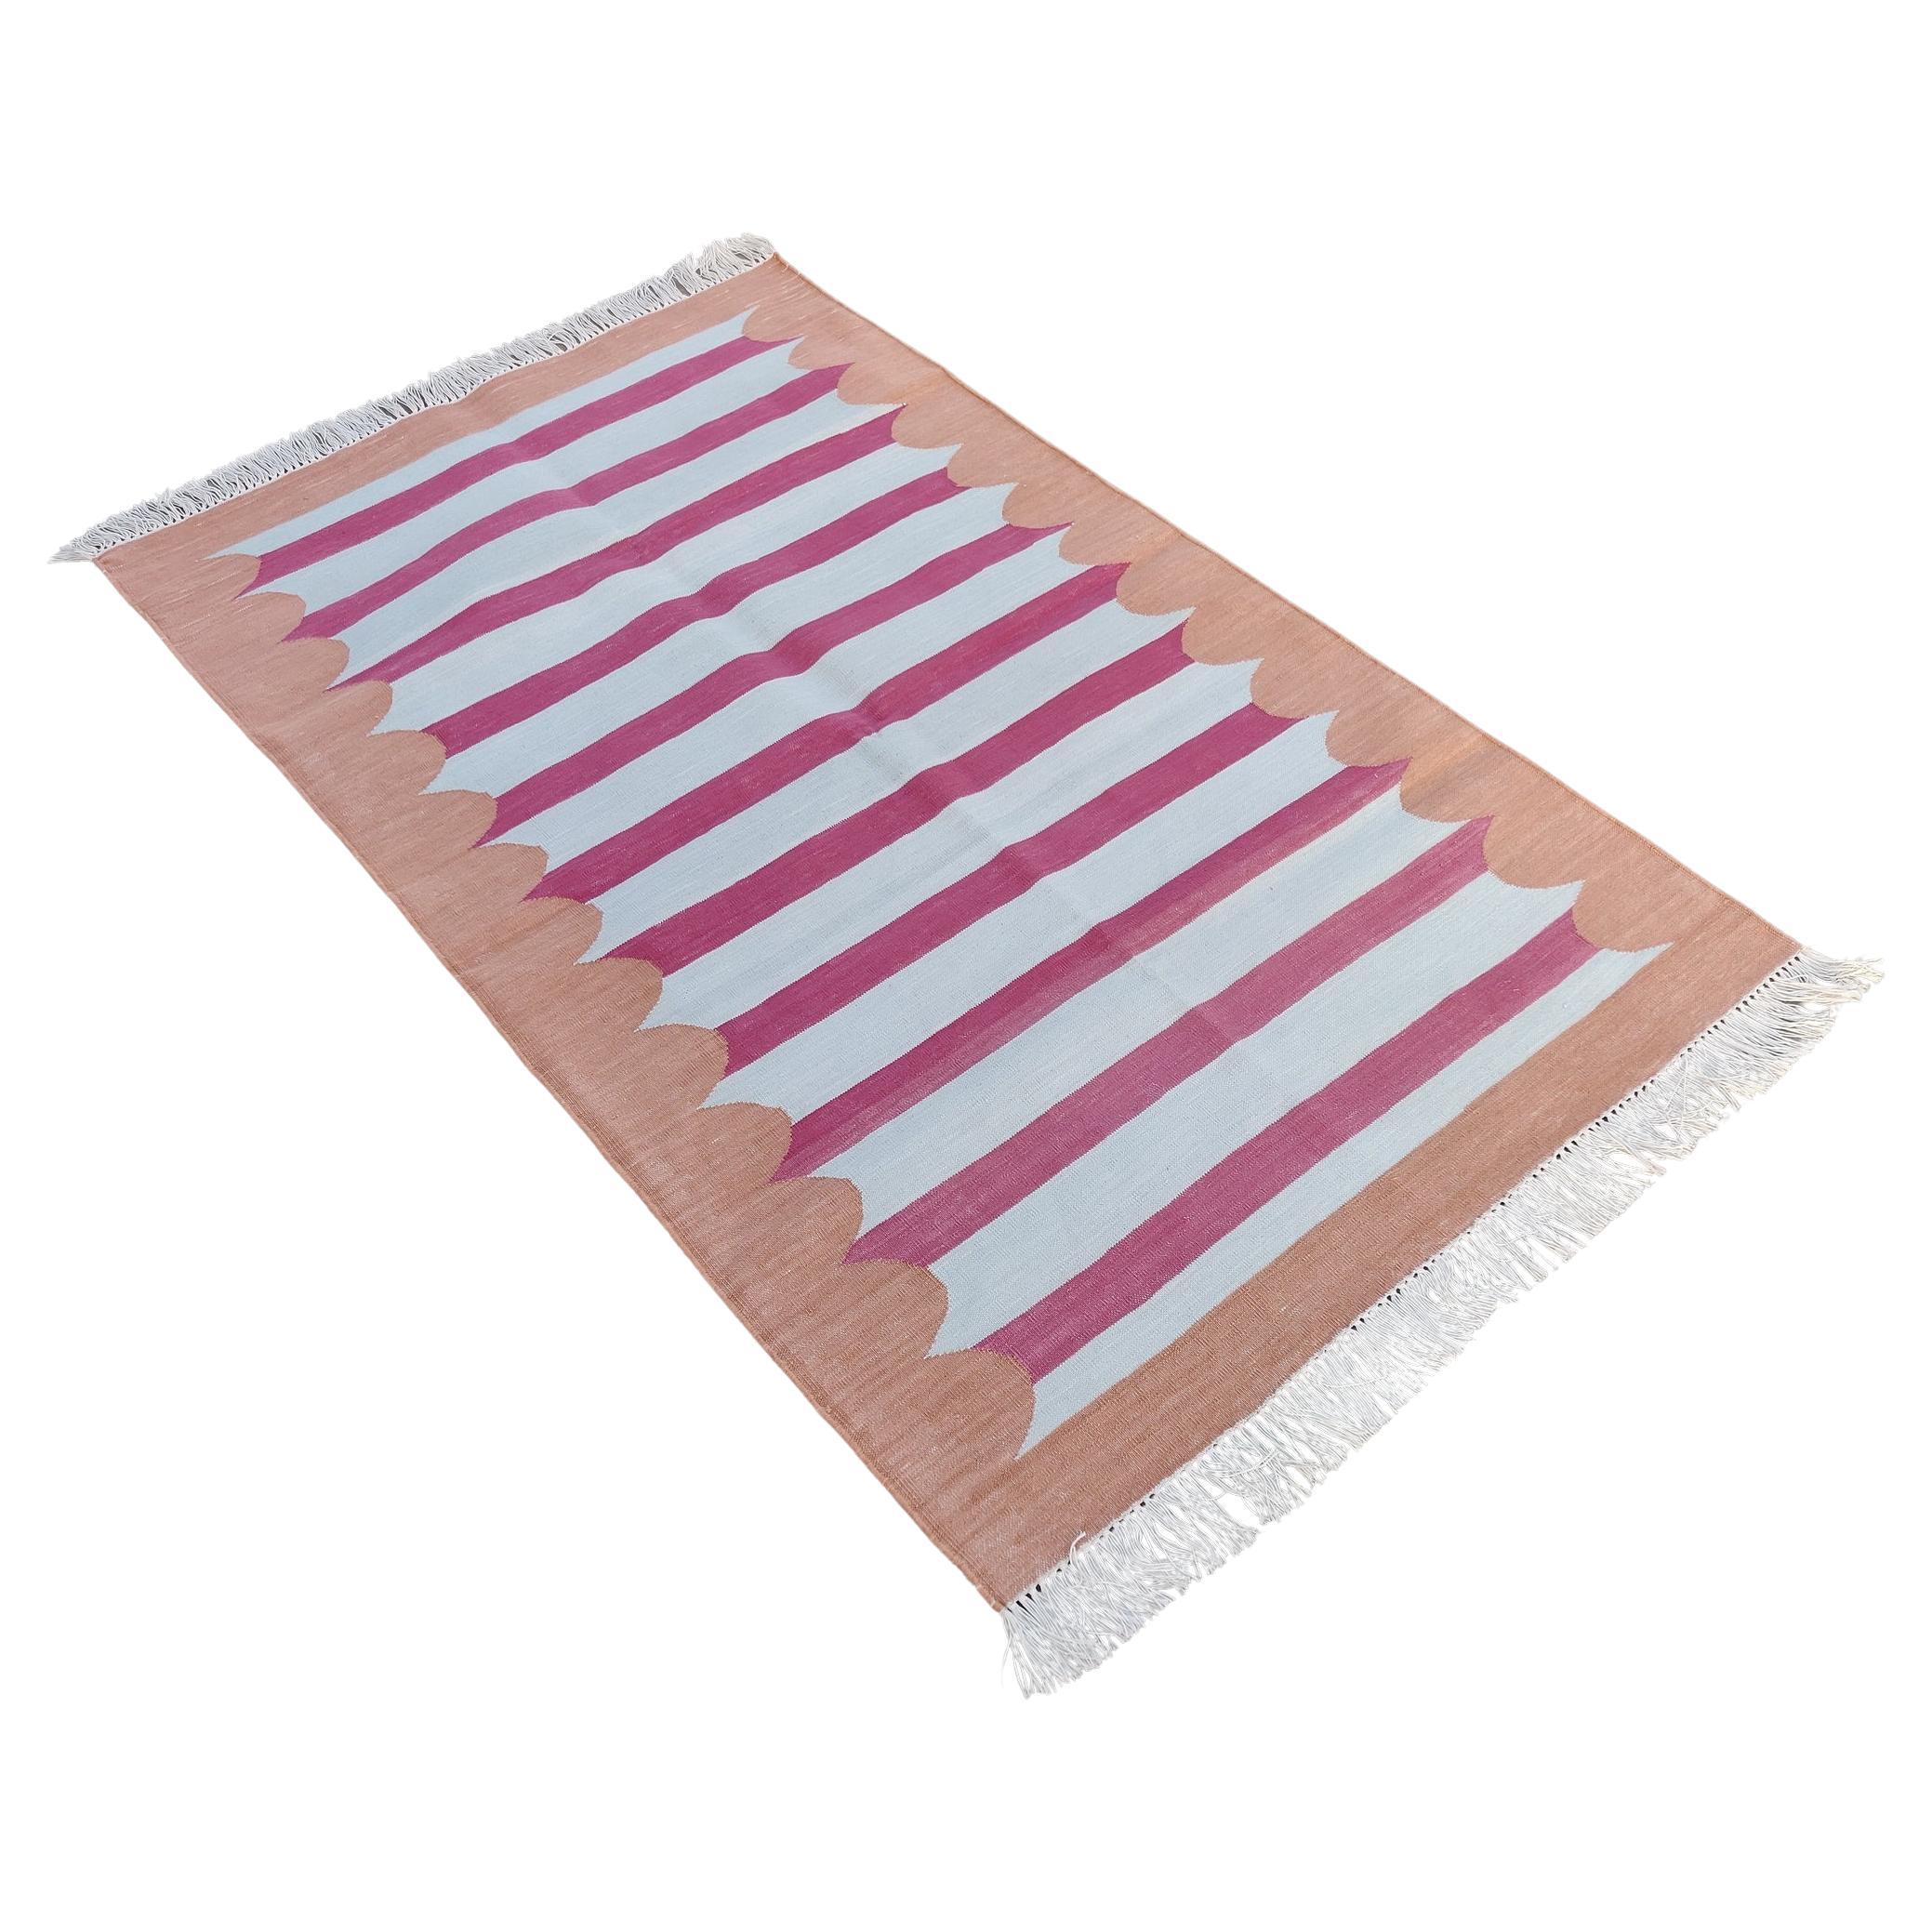 Handmade Cotton Area Flat Weave Rug, 3x5 Pink And Tan Striped Indian Dhurrie Rug For Sale